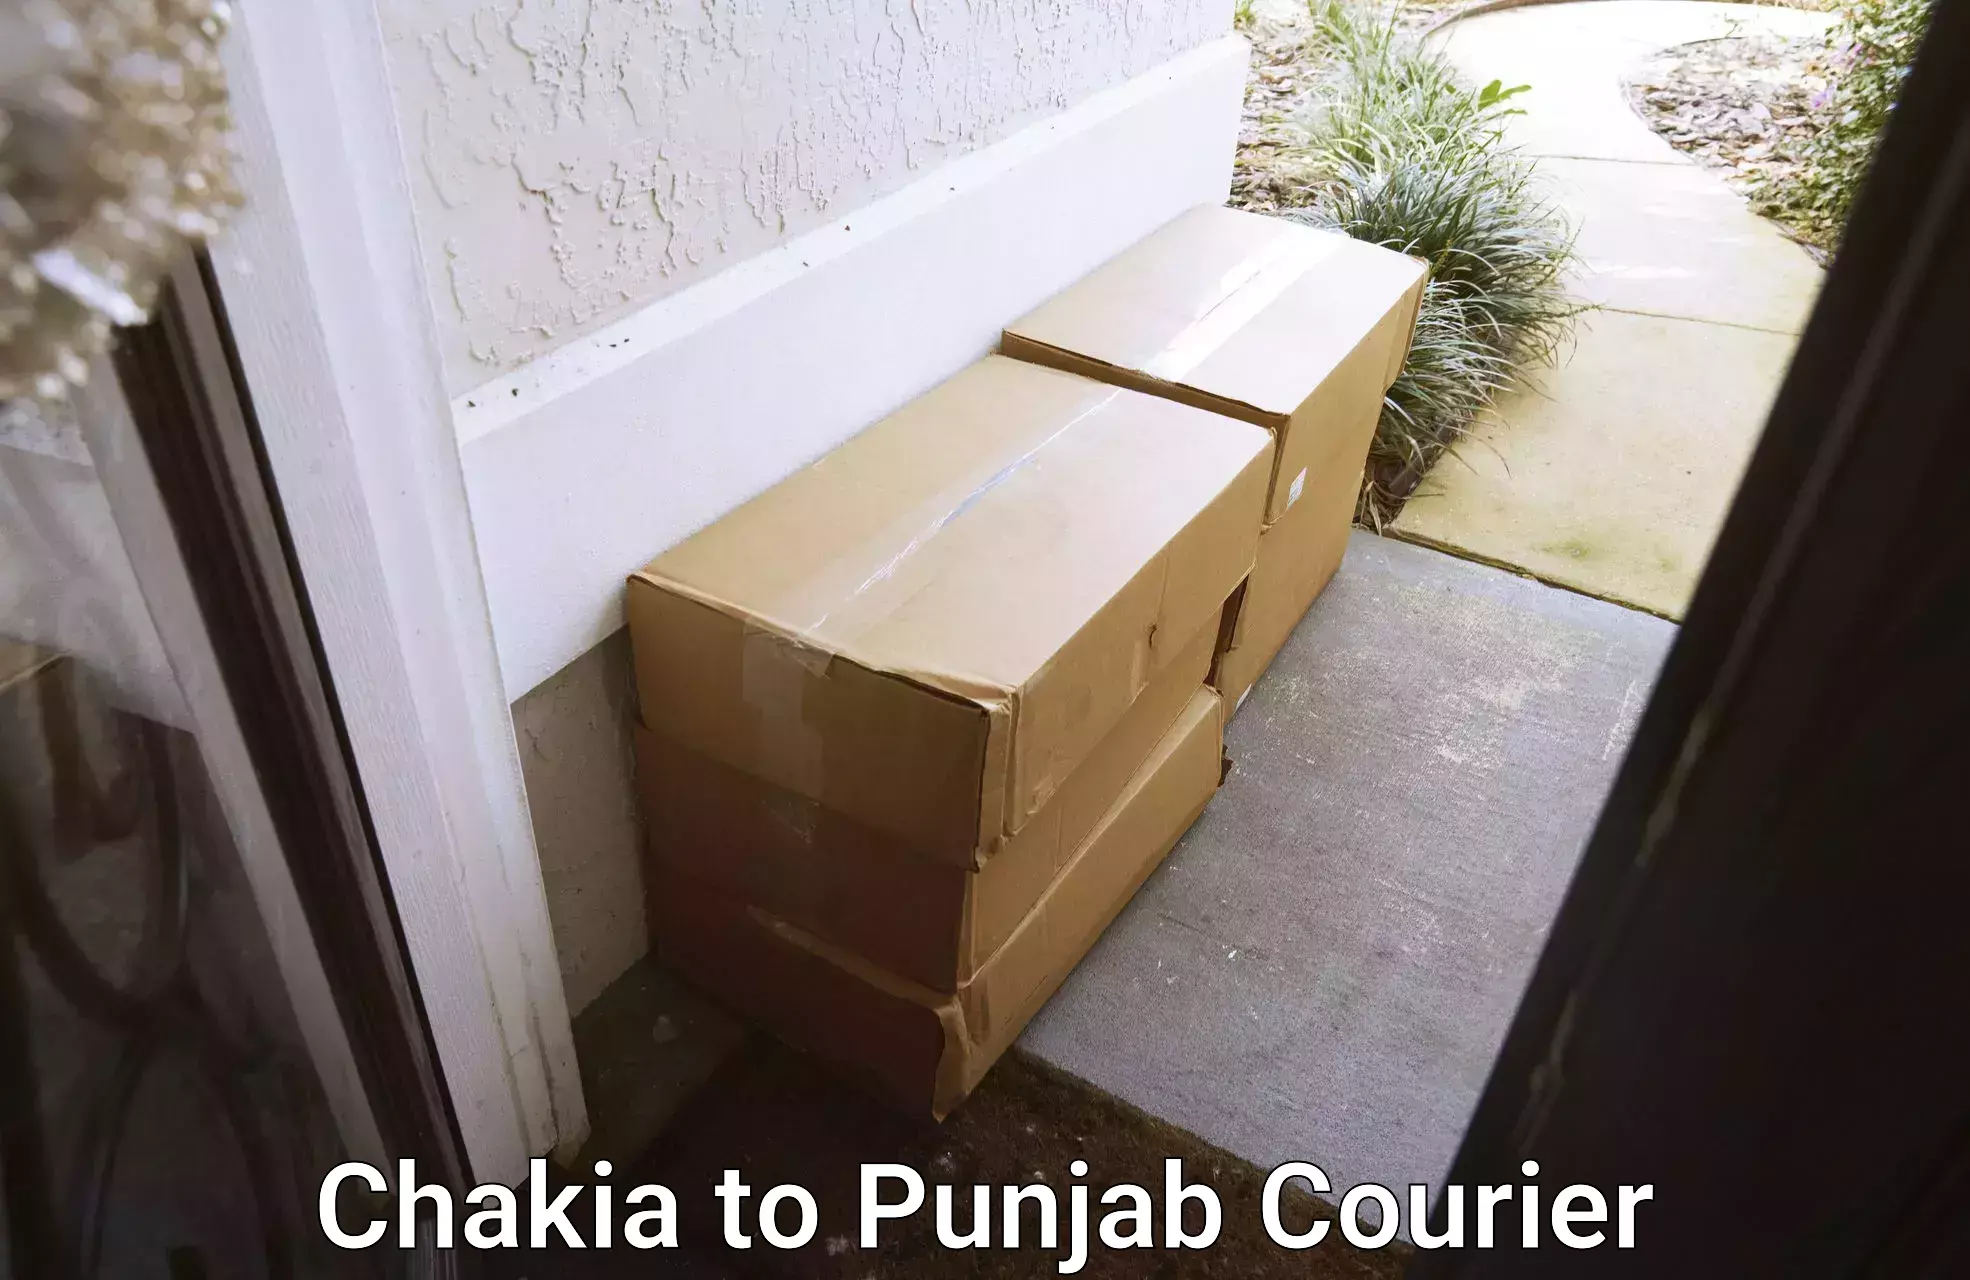 Household moving experts Chakia to Punjab